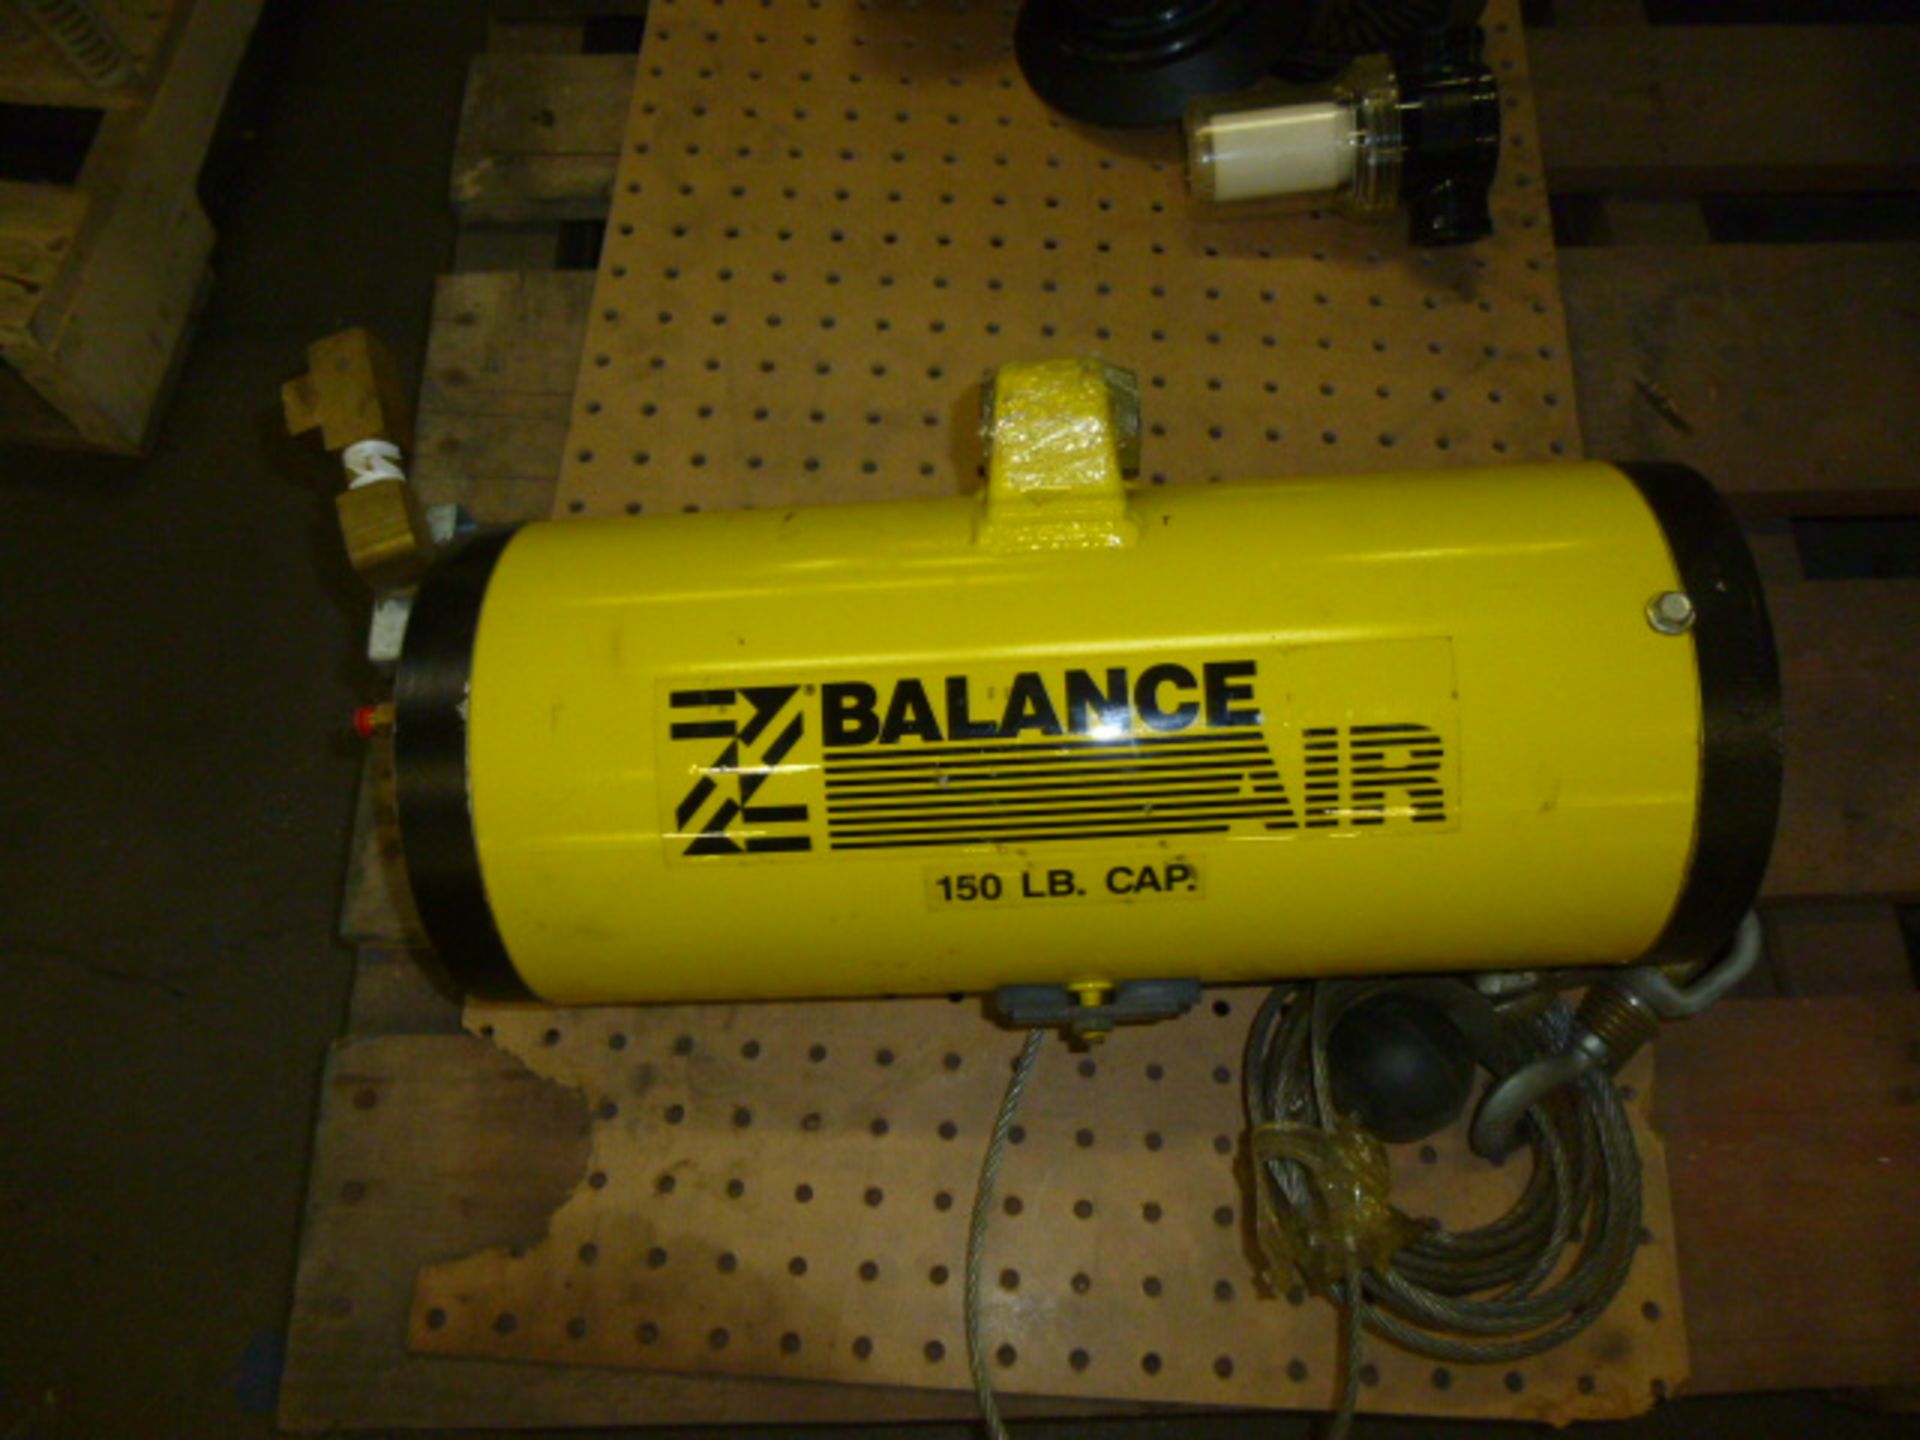 Lot of 2 Air balance Zimmerman Series EA, ZA, BA Parts and manual included Item Location: Montreal - Image 2 of 4